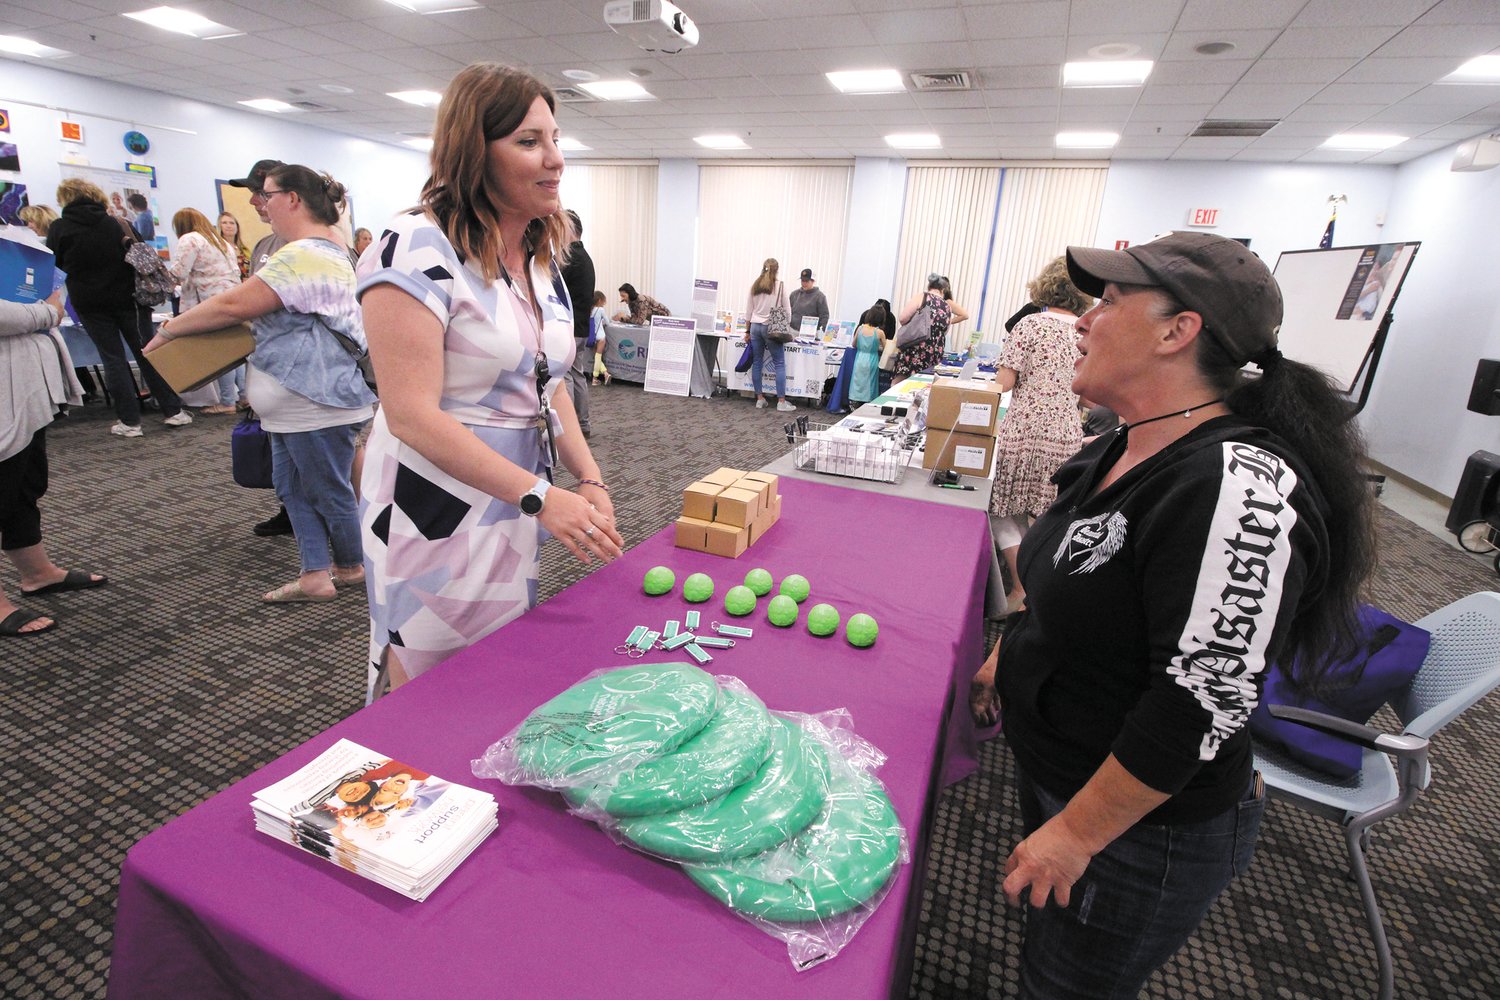 AT MENTAL HEALTH FAIR:  Cameron Kadek, left, and Martha Battella of the Parent Support Network compare notes at the mental health fair Kadek organized at the library. (Warwick Beacon photo)